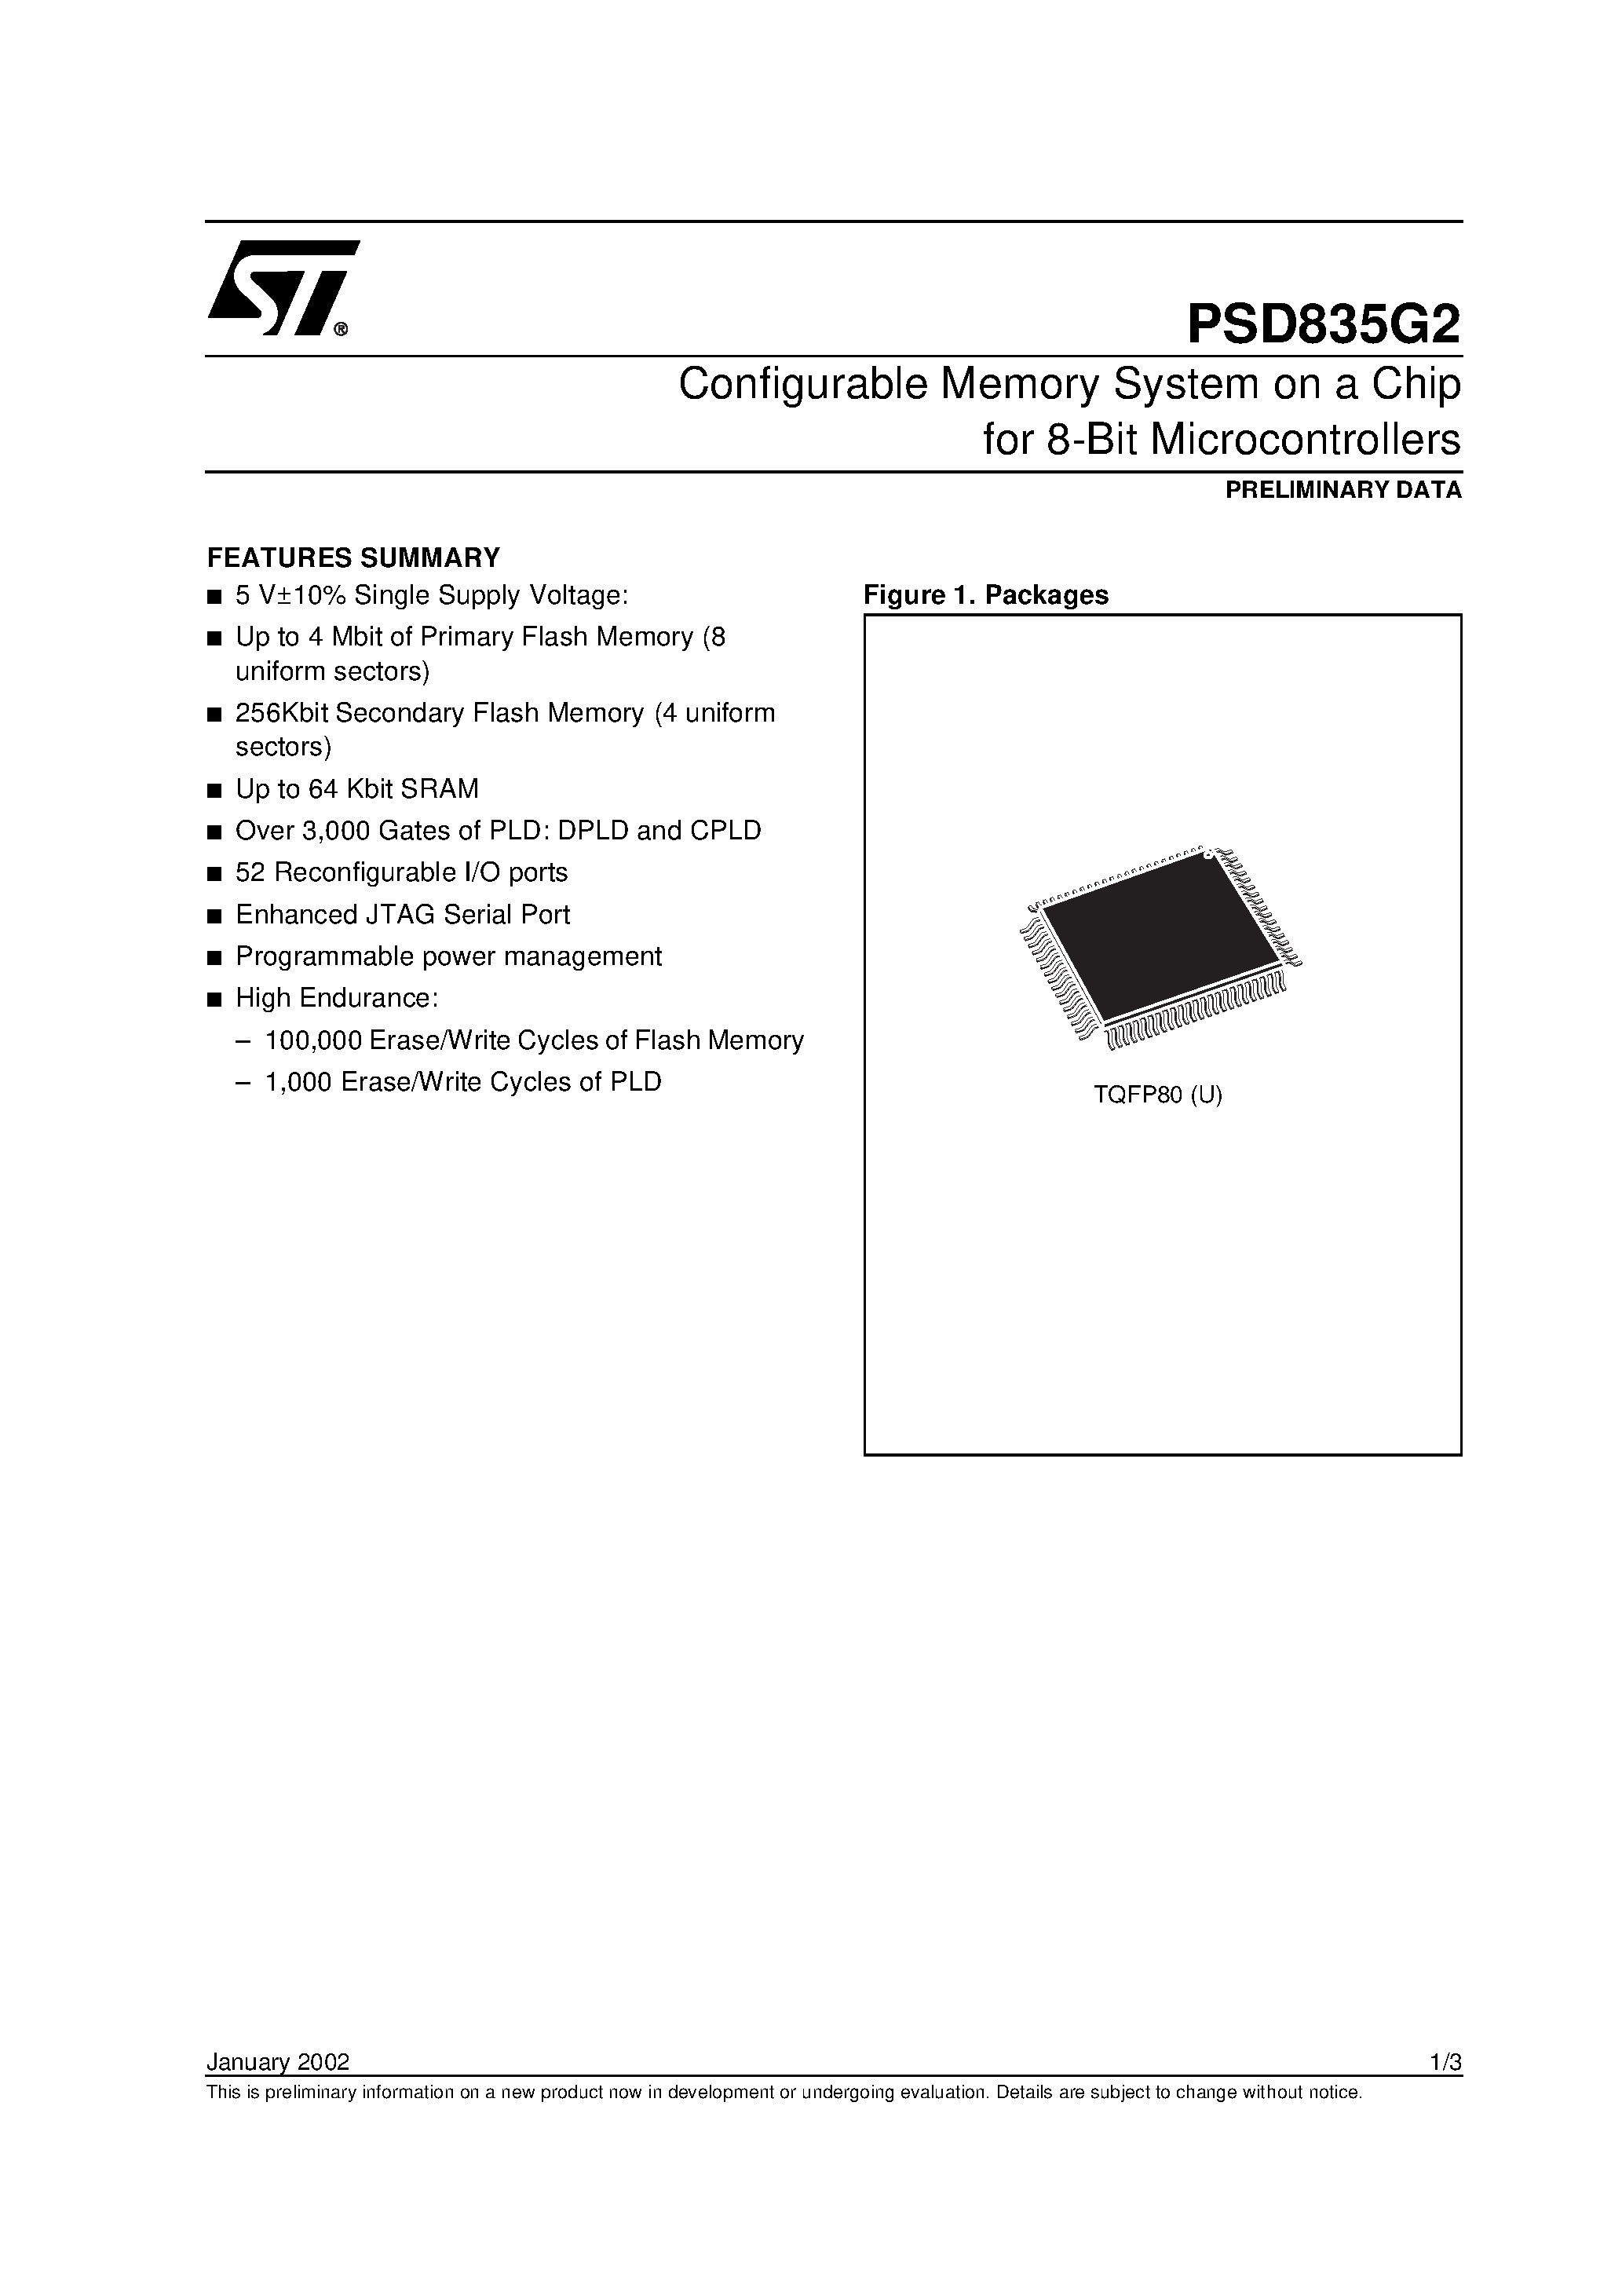 Datasheet PSD835F2-A-15JI - Configurable Memory System on a Chip for 8-Bit Microcontrollers page 1